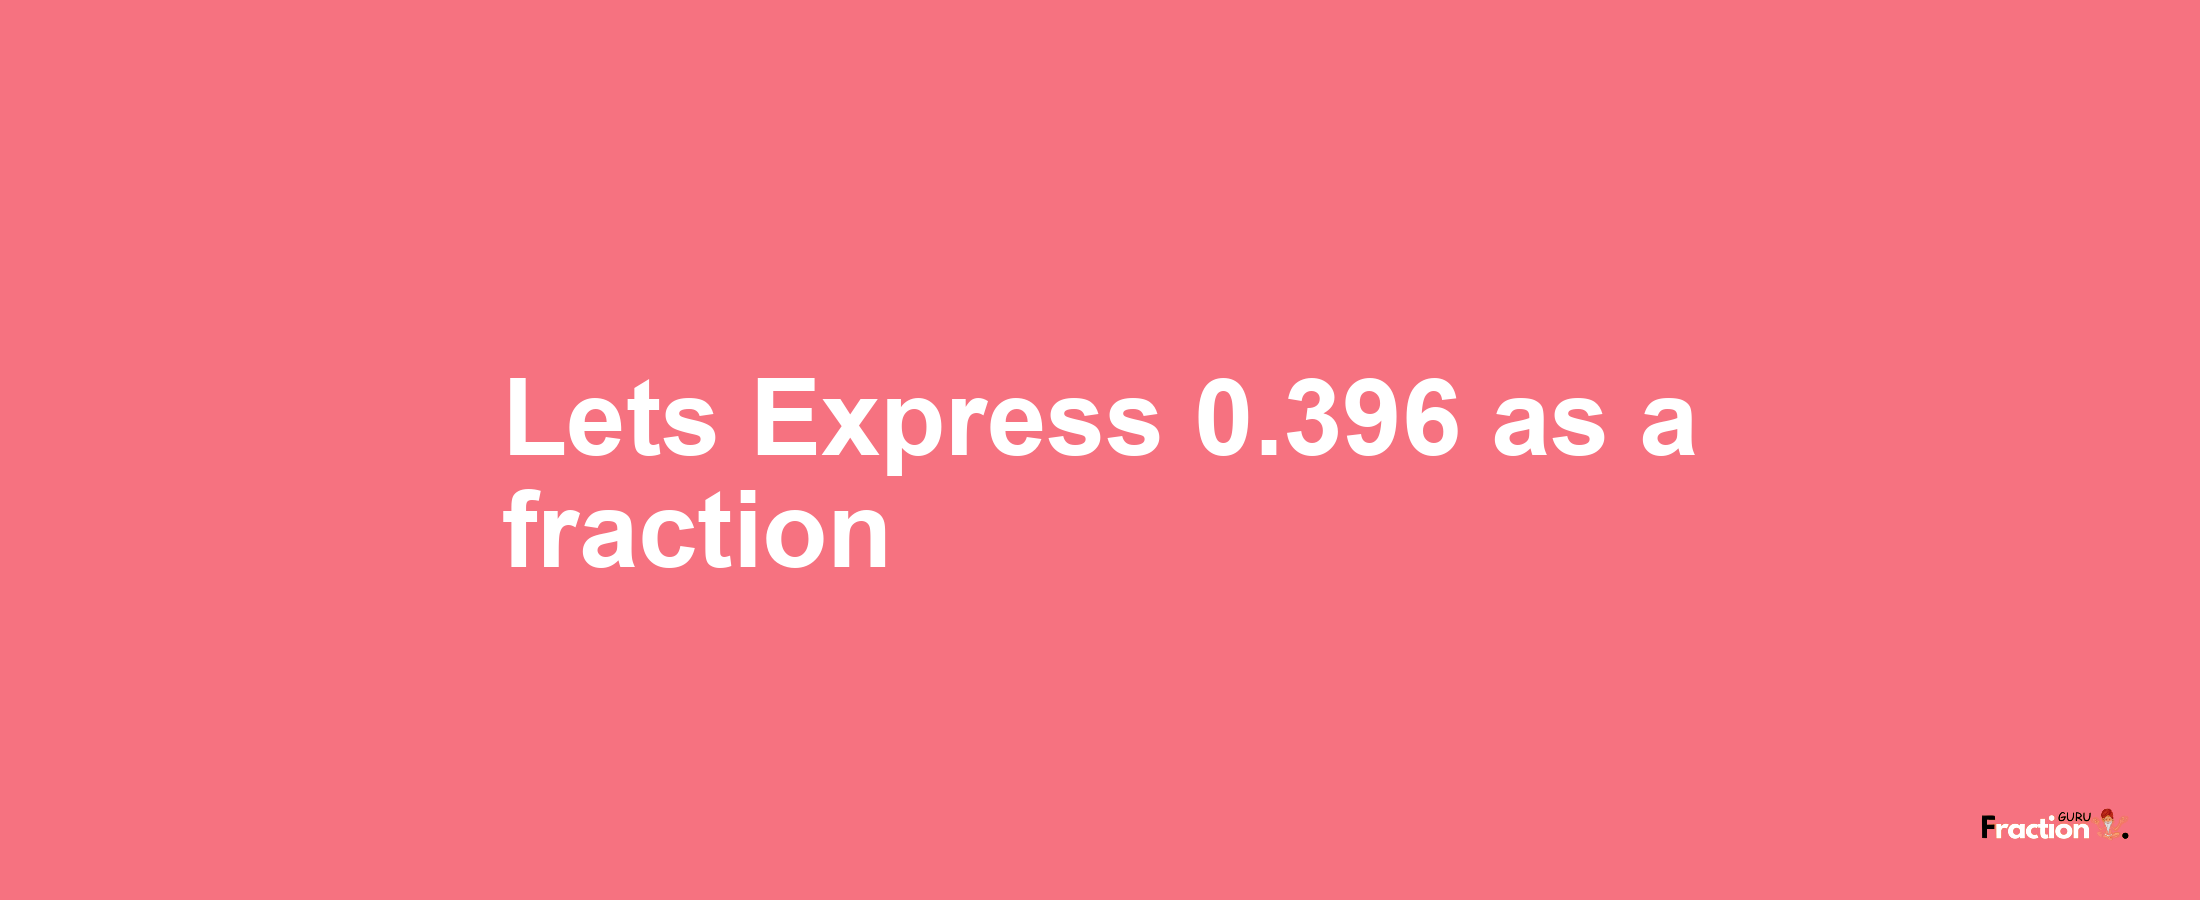 Lets Express 0.396 as afraction